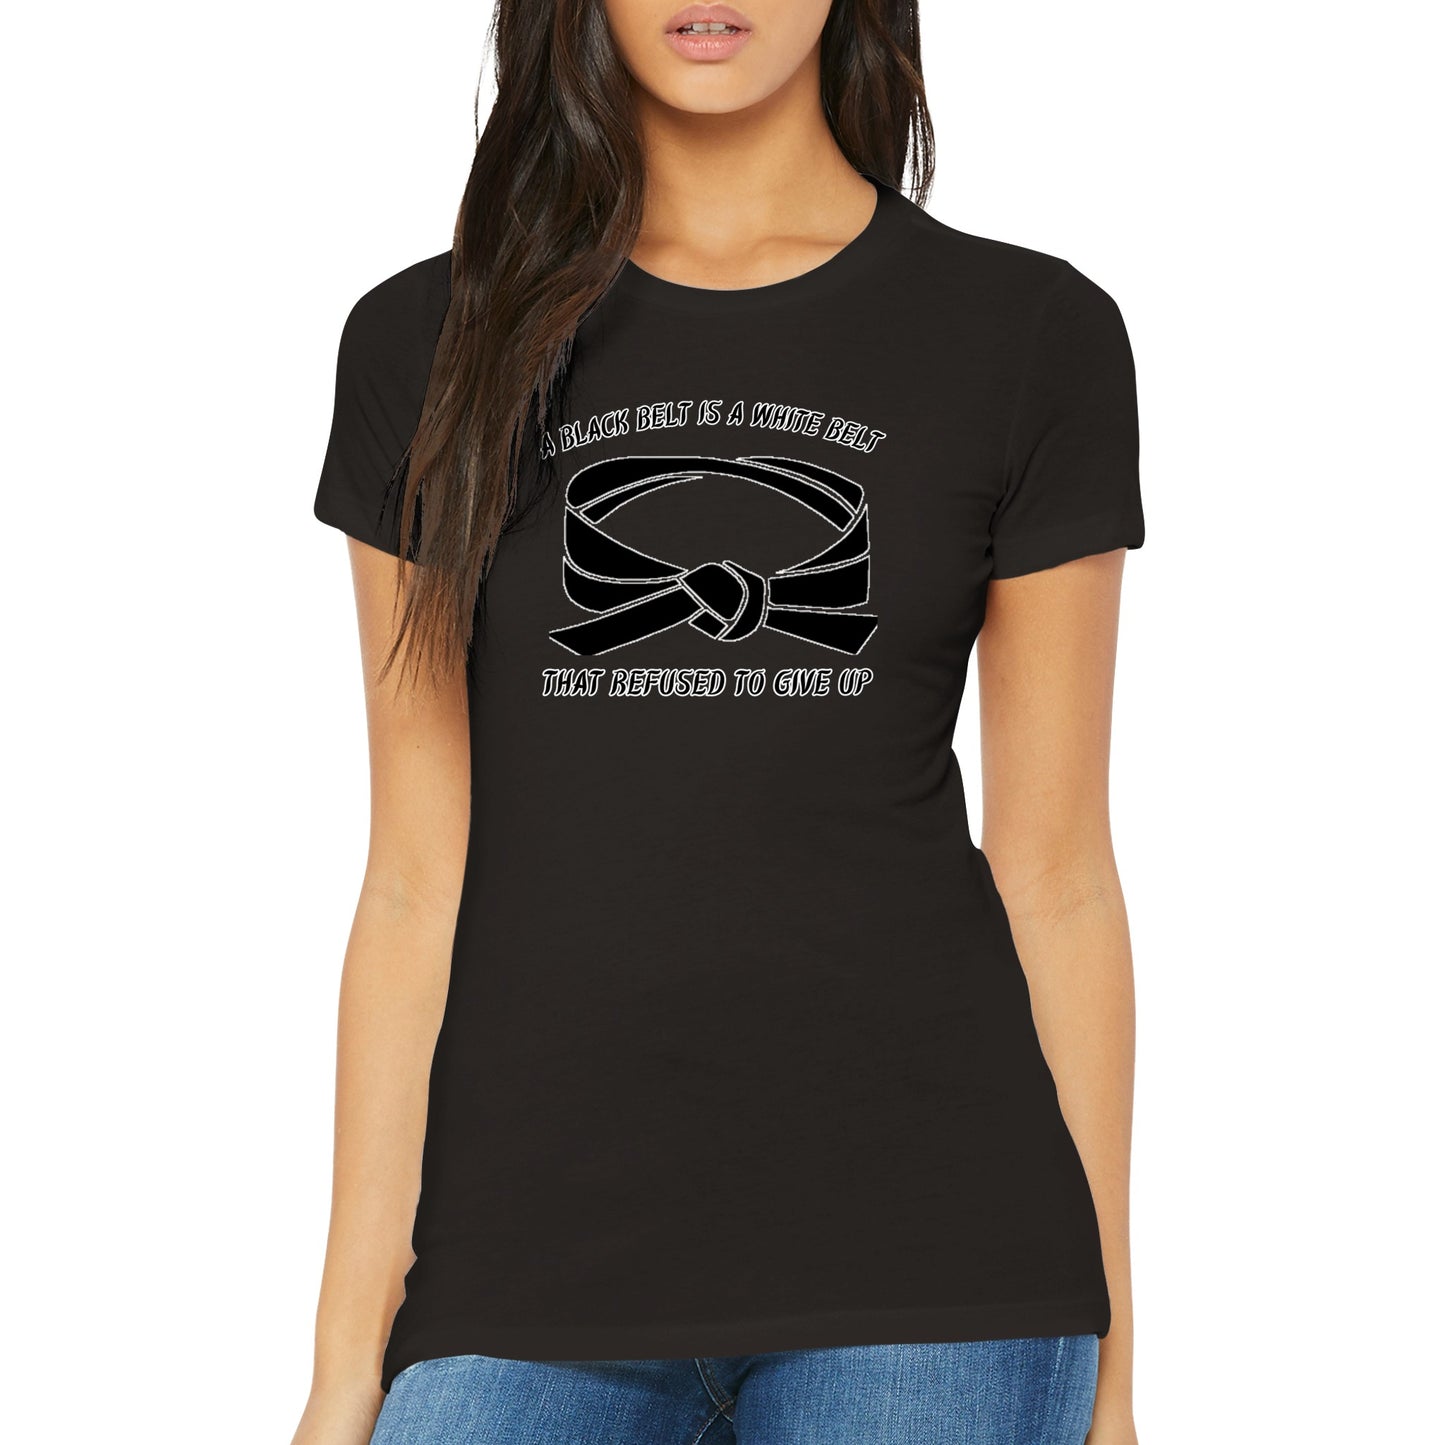 Refused to Give Up Ladies T-shirt